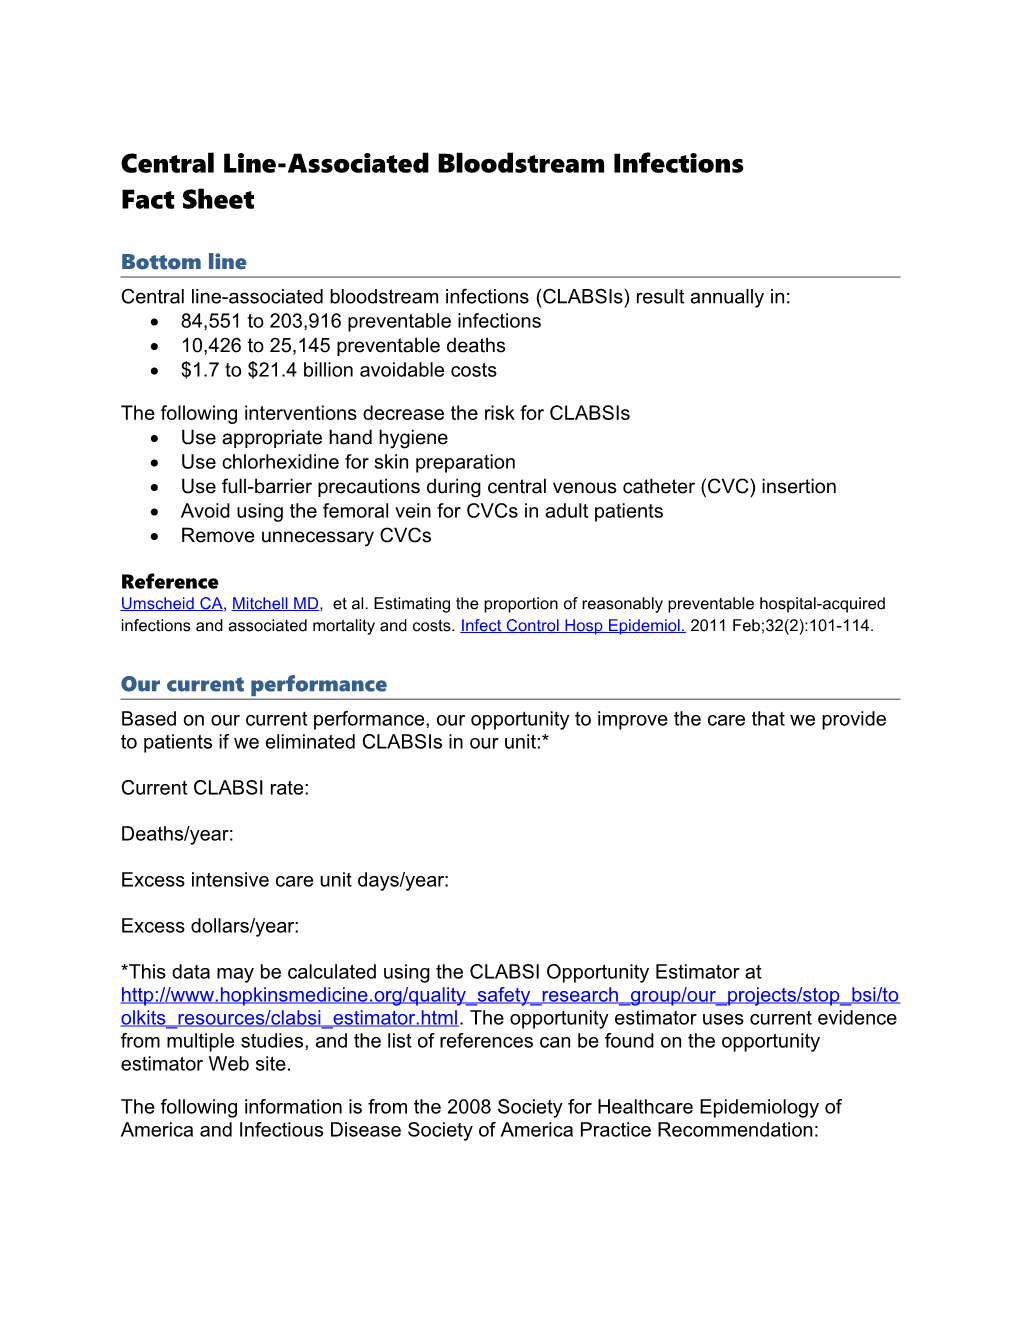 Central Line-Associated Bloodstream Infections(Clabsis) Result Annually In